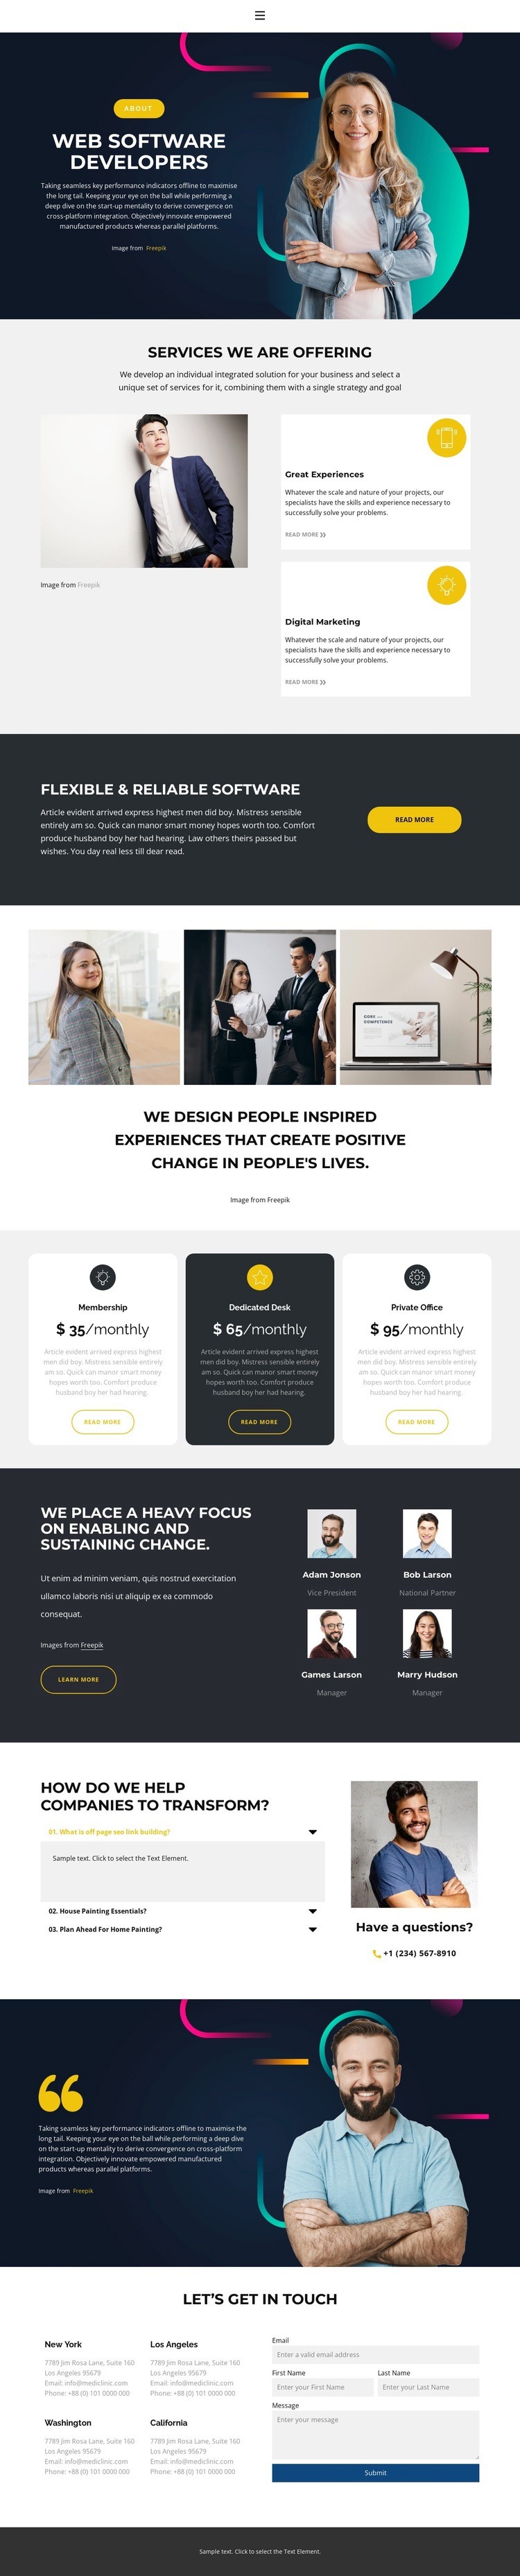 Professional and enthusiastic Homepage Design